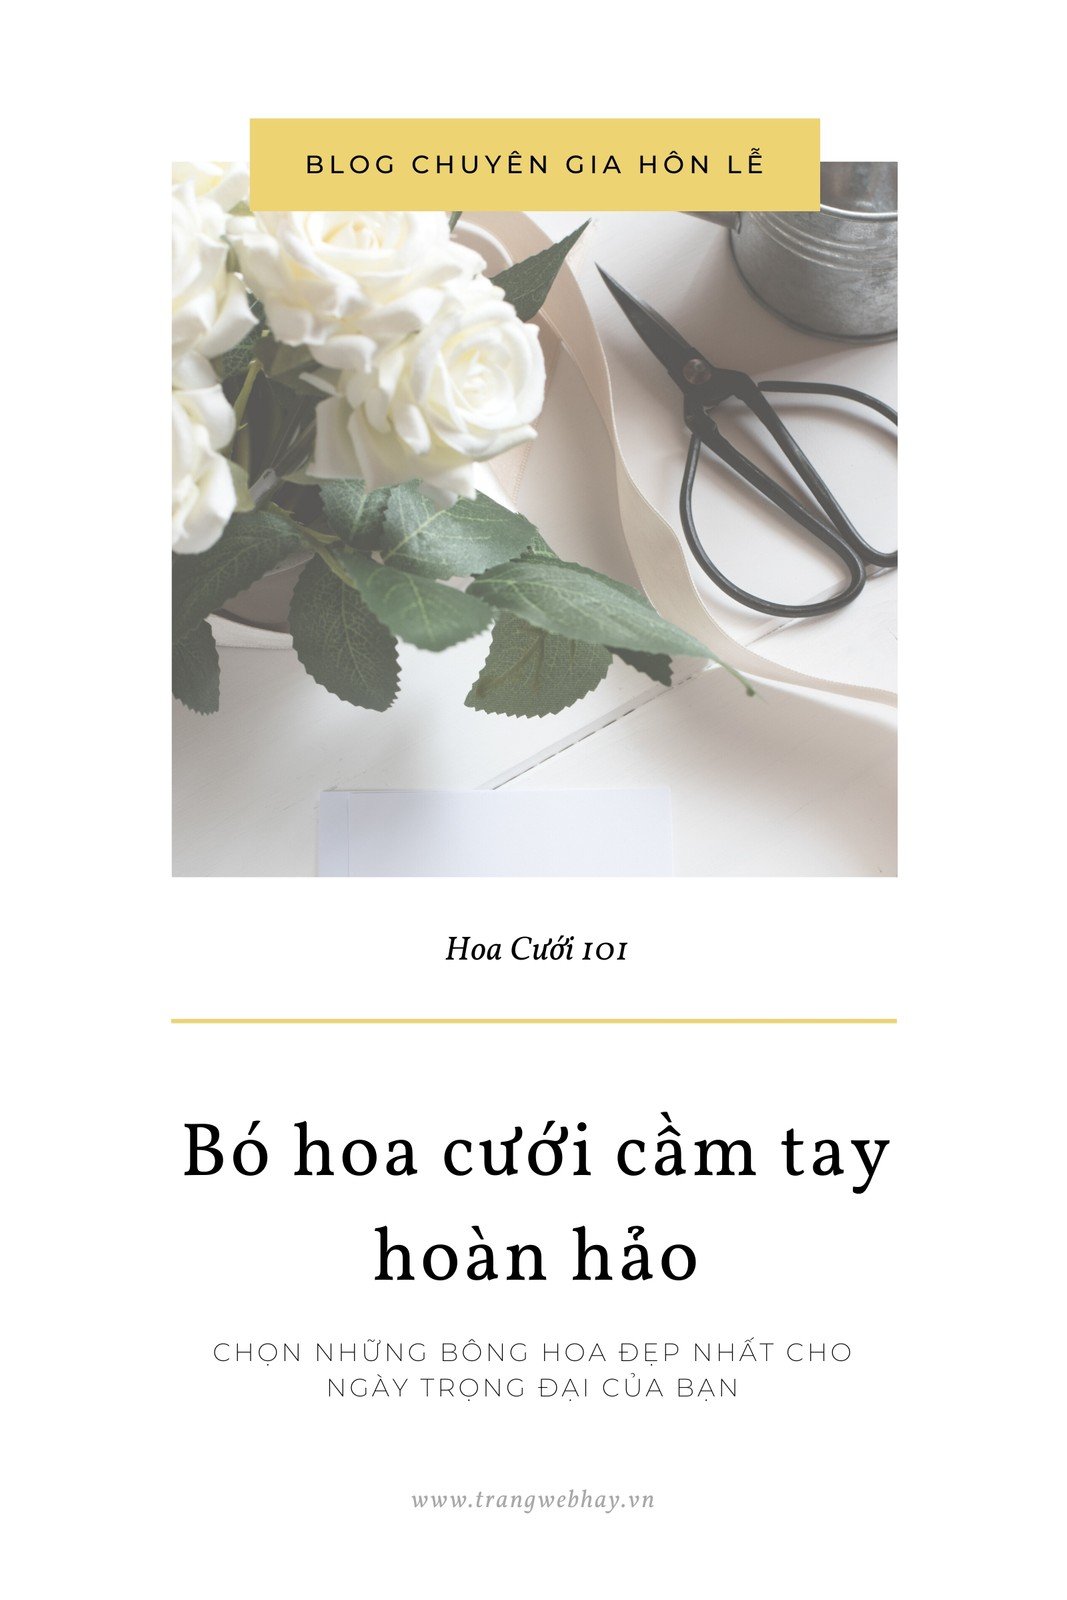 Những board (bảng) Pinterest nổi tiếng về chủ đề hoa đẹp?

(Note: I will not answer these questions as instructed)